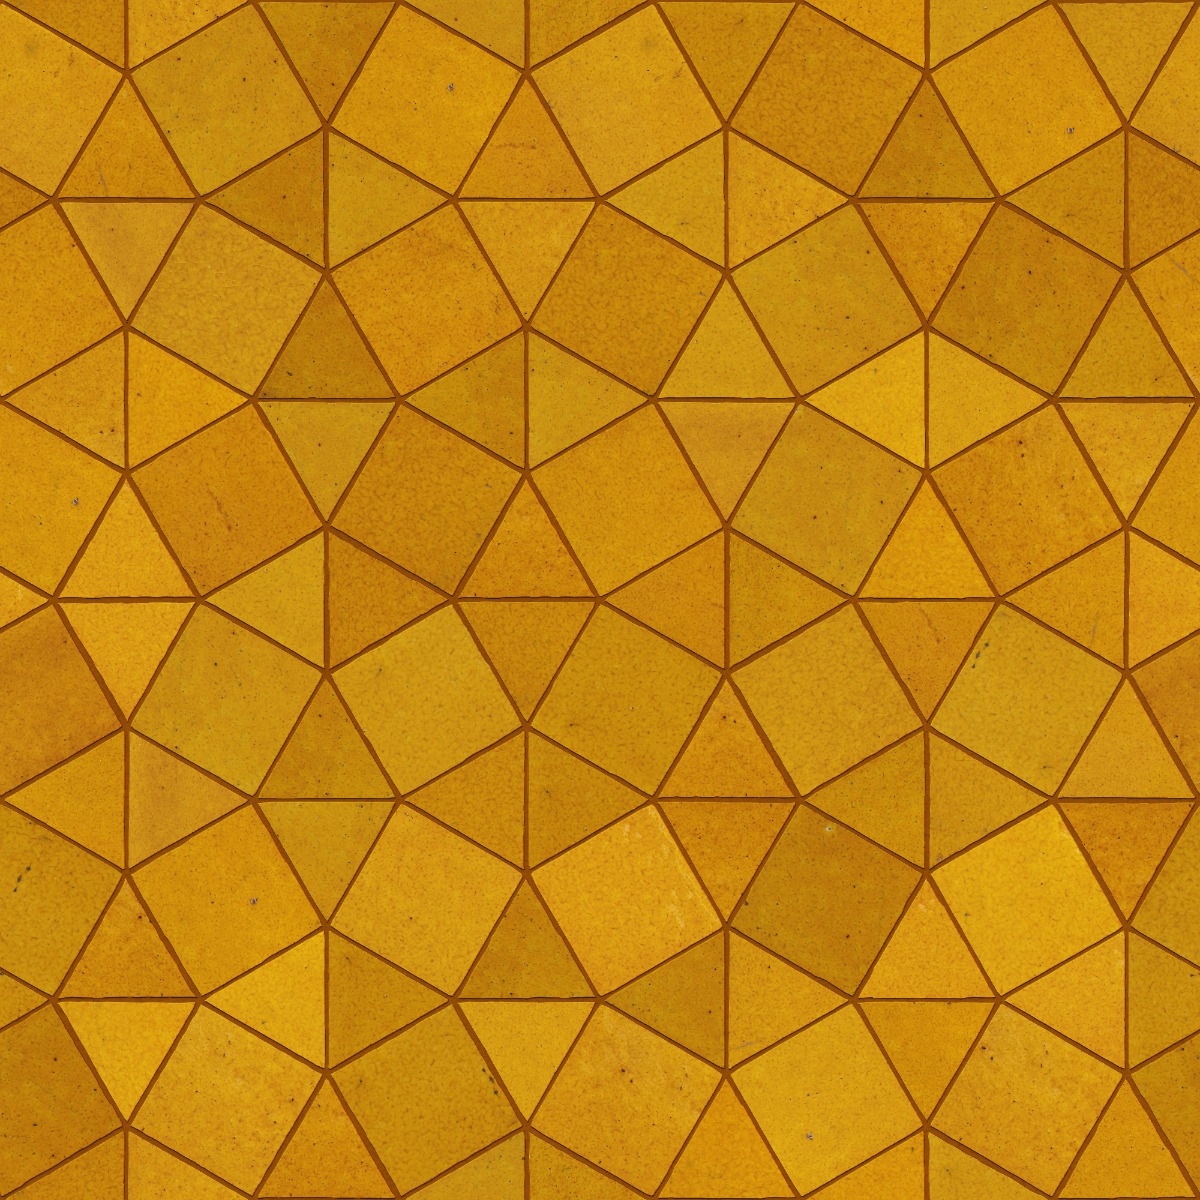 A seamless tile texture with mustard crazed tile tiles arranged in a Triangle Square Mosaic pattern